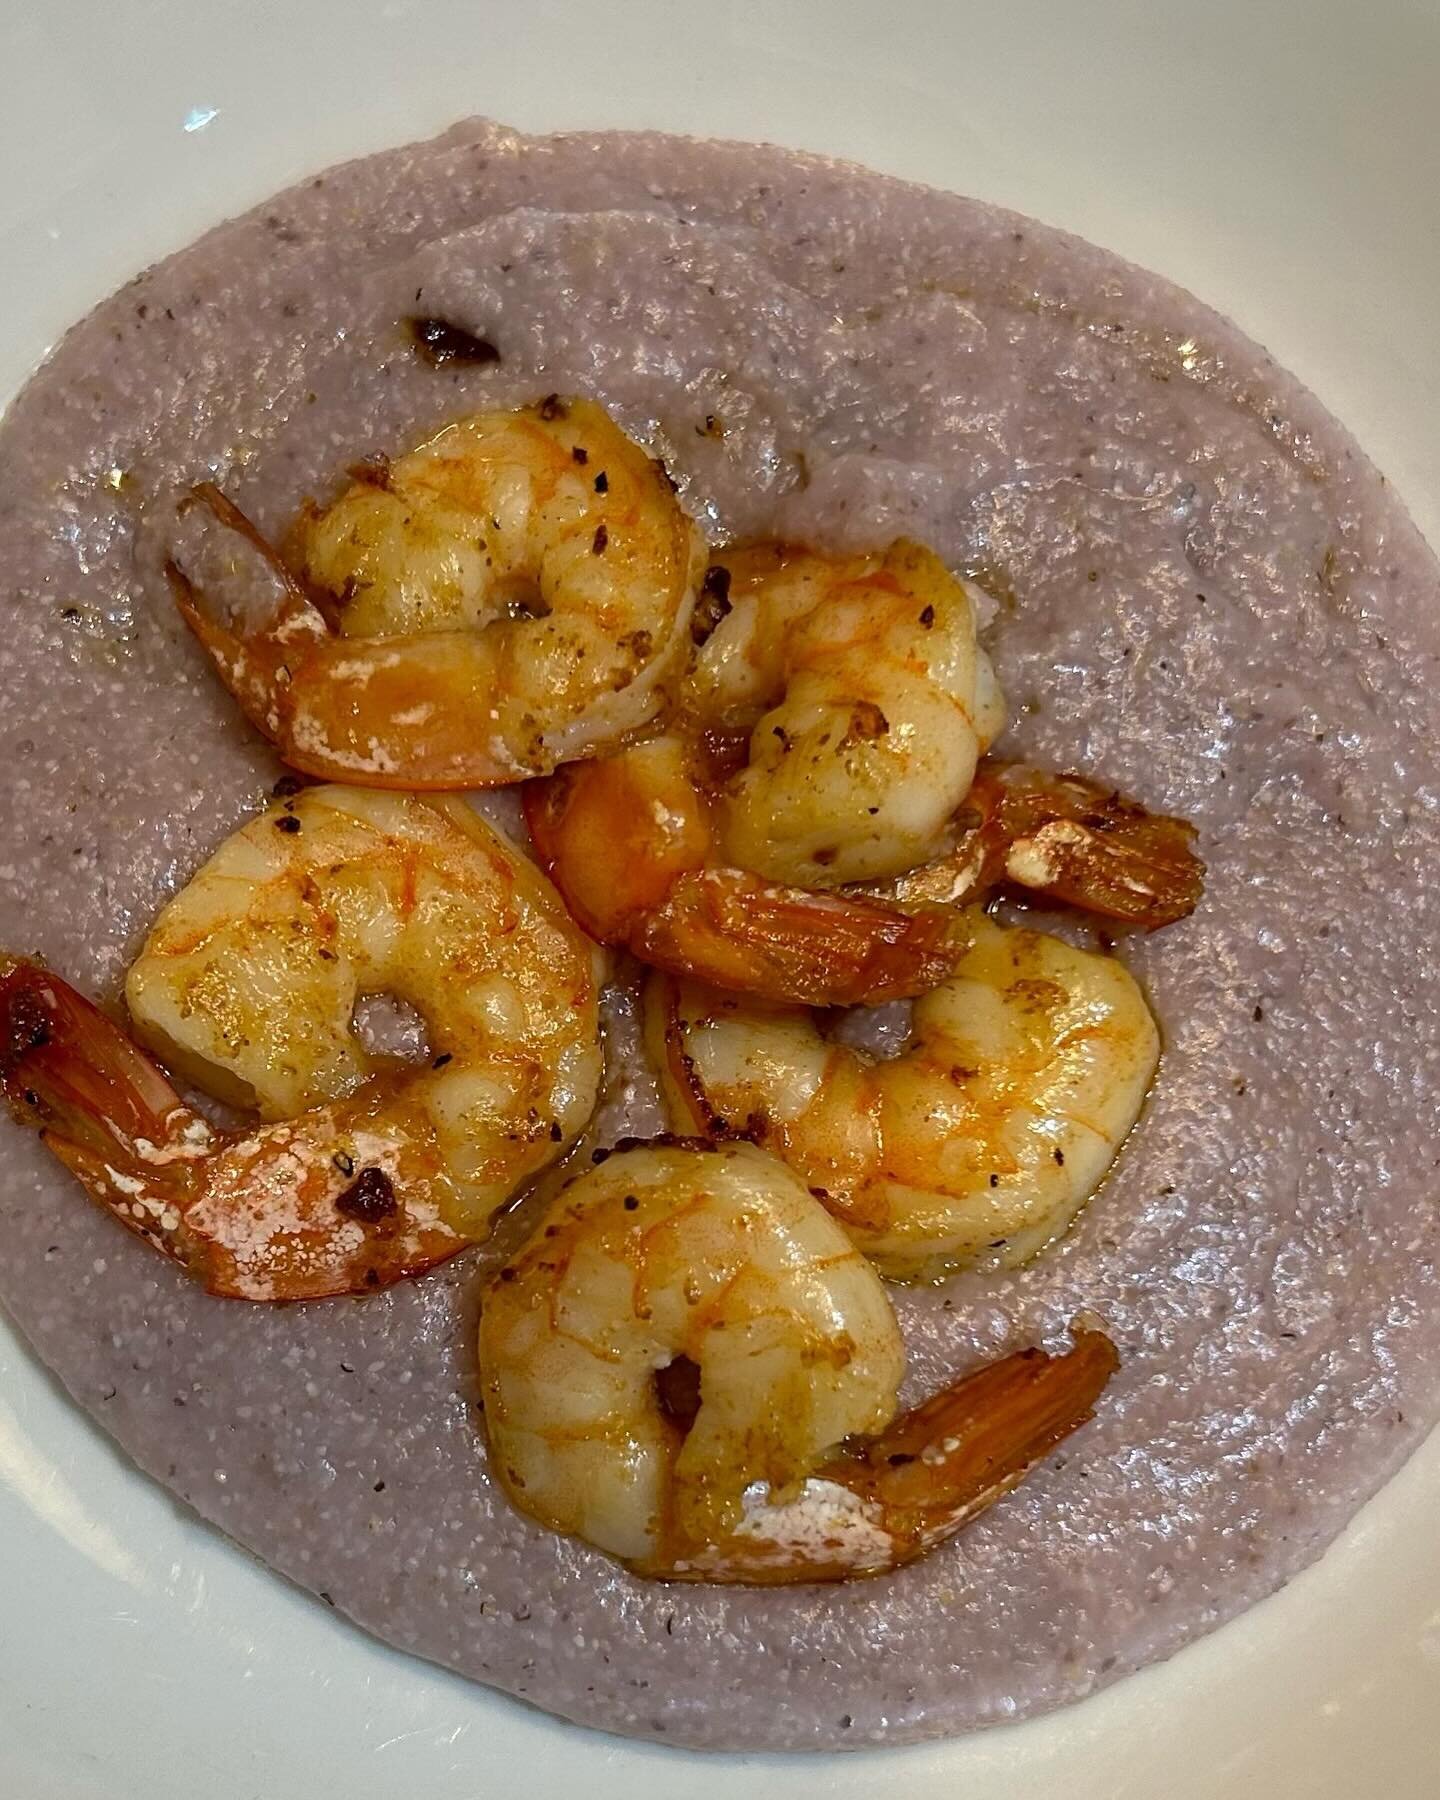 Blue Clarage Grits and Cornmeal are back and on sale now through the end of the month on our site- link in bio. This variety of heirloom dent corn grown by our friends at @dresbachfarms is striking in color and in flavor! Find our recipe for Shrimp a